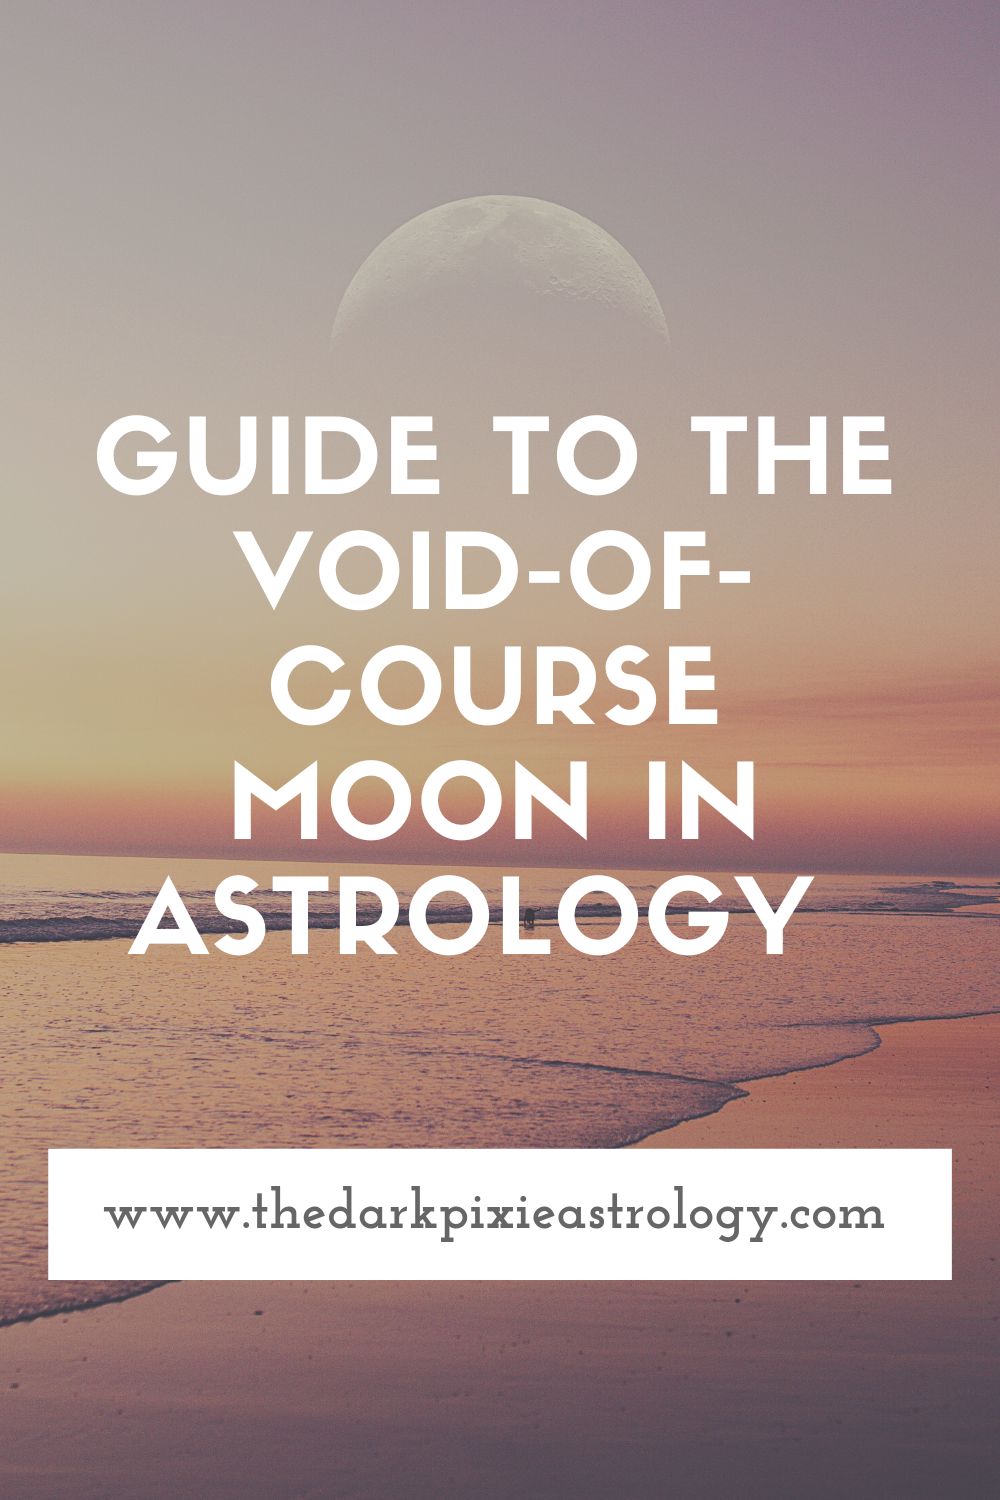 Guide to the Void-of-Course Moon in Astrology - The Dark Pixie Astrology